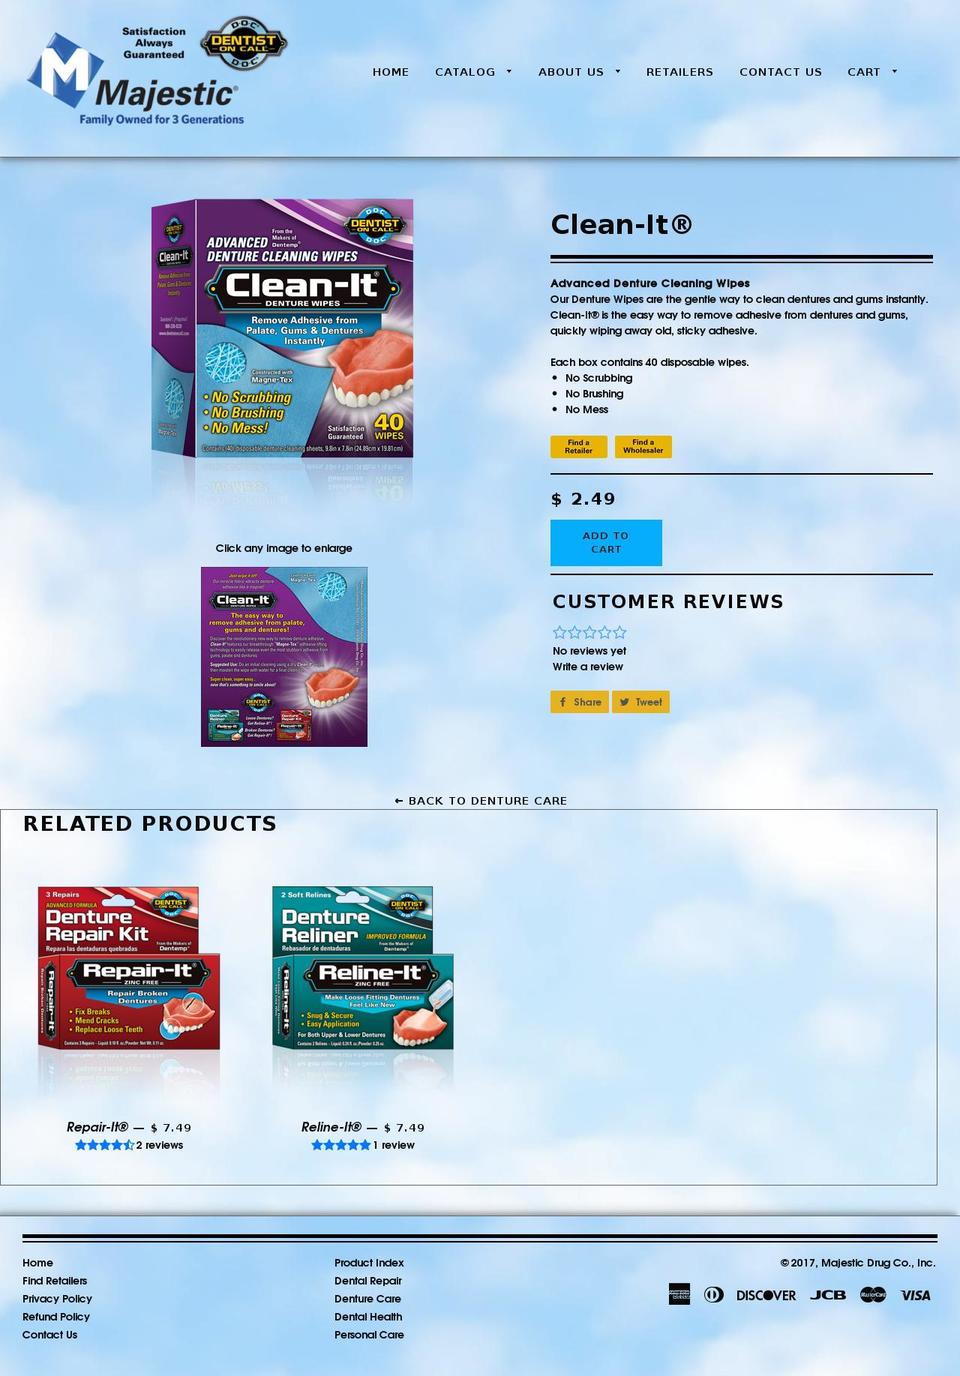 Brooklyn Shopify theme site example cleanitwipes.com